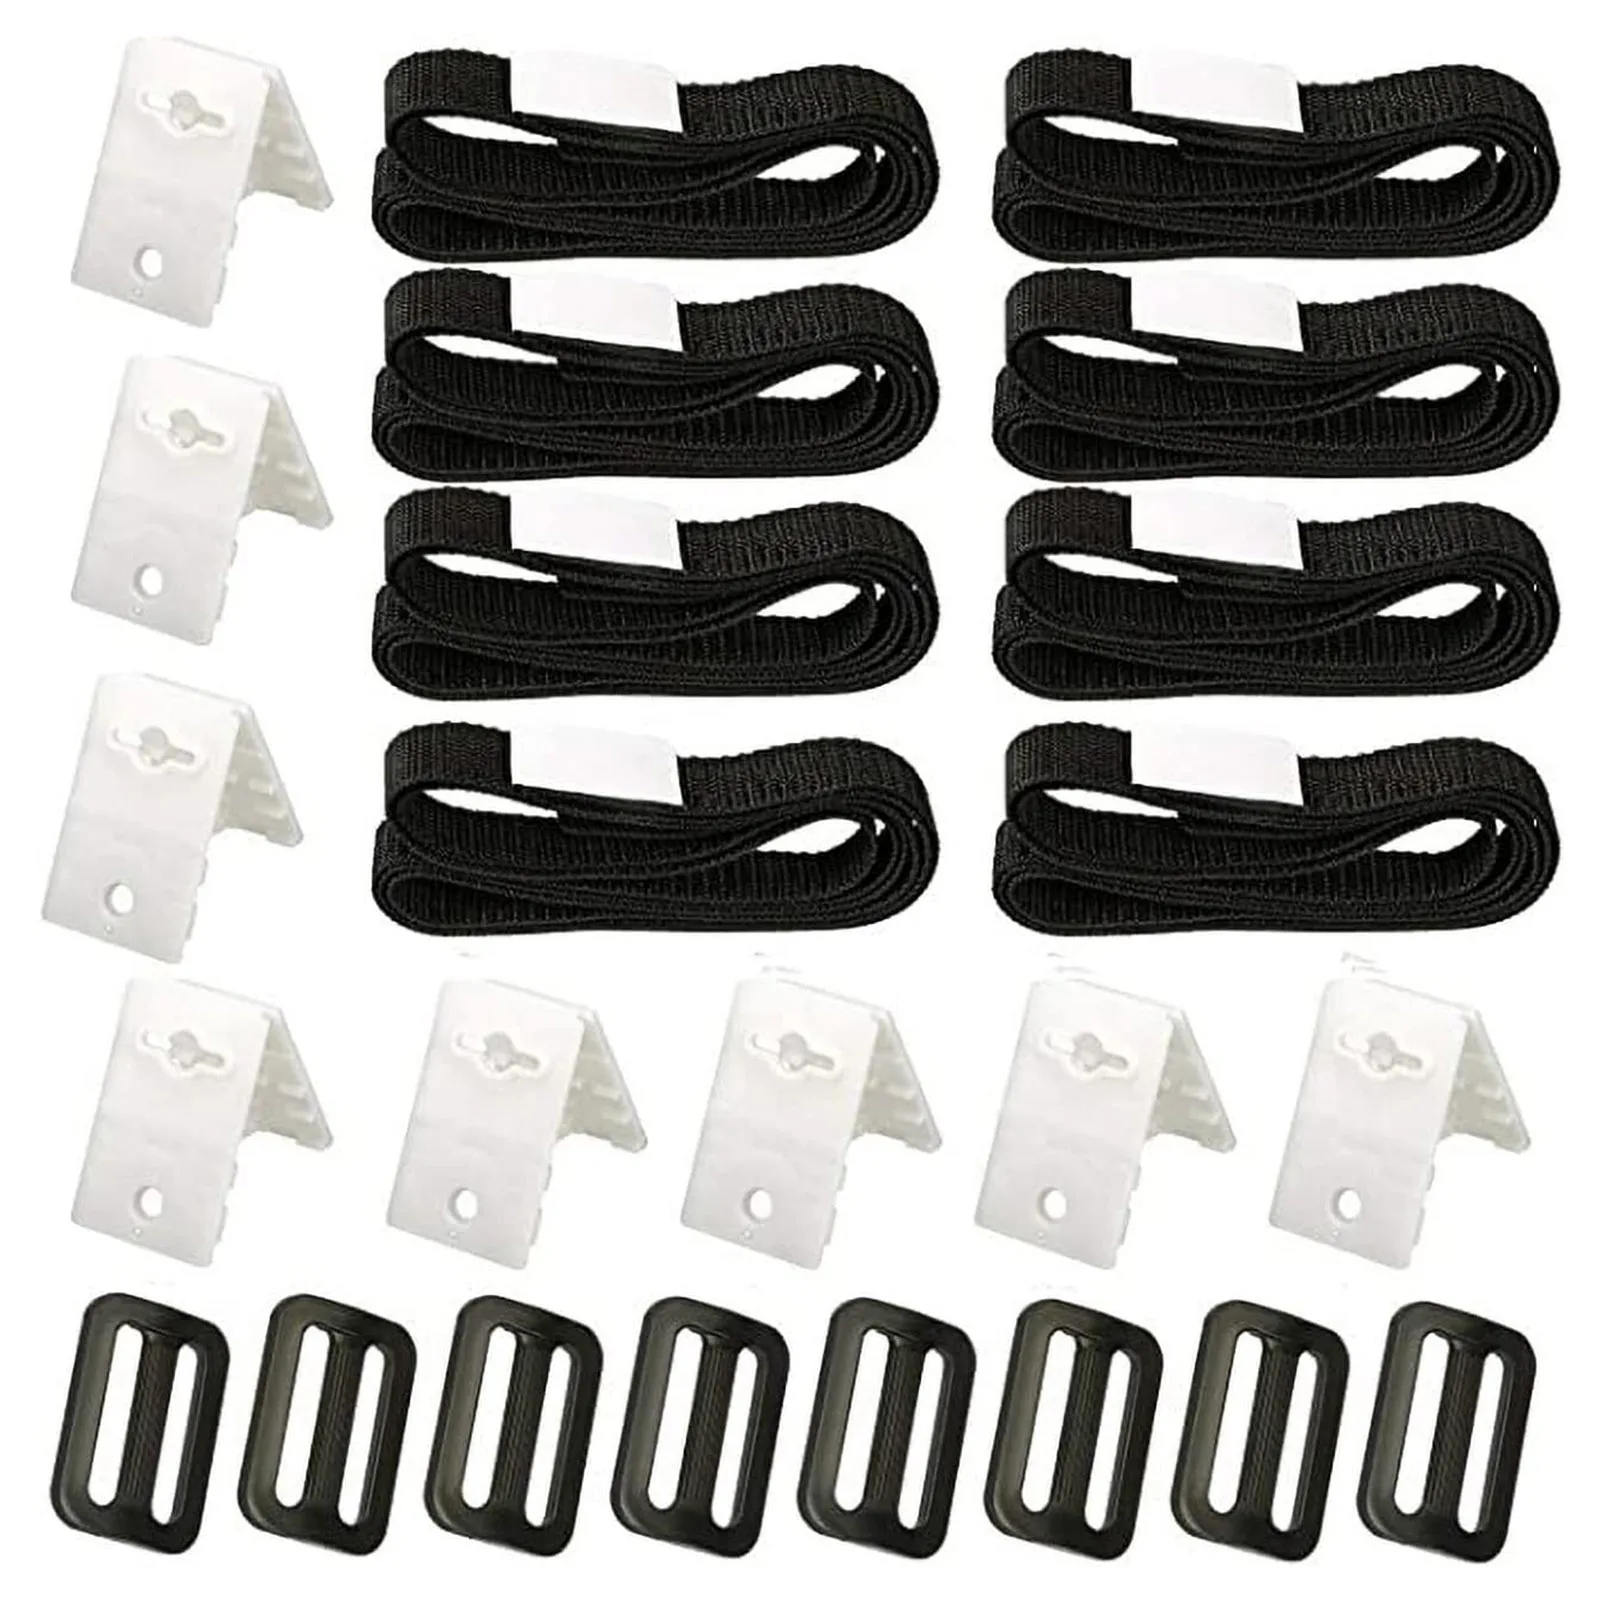 Pool Cover Reel Straps Solar Cover Reel Attachment Kit 24pcs Pool Solar Cover Reel Attachment Kit For Inground Swimming Pool